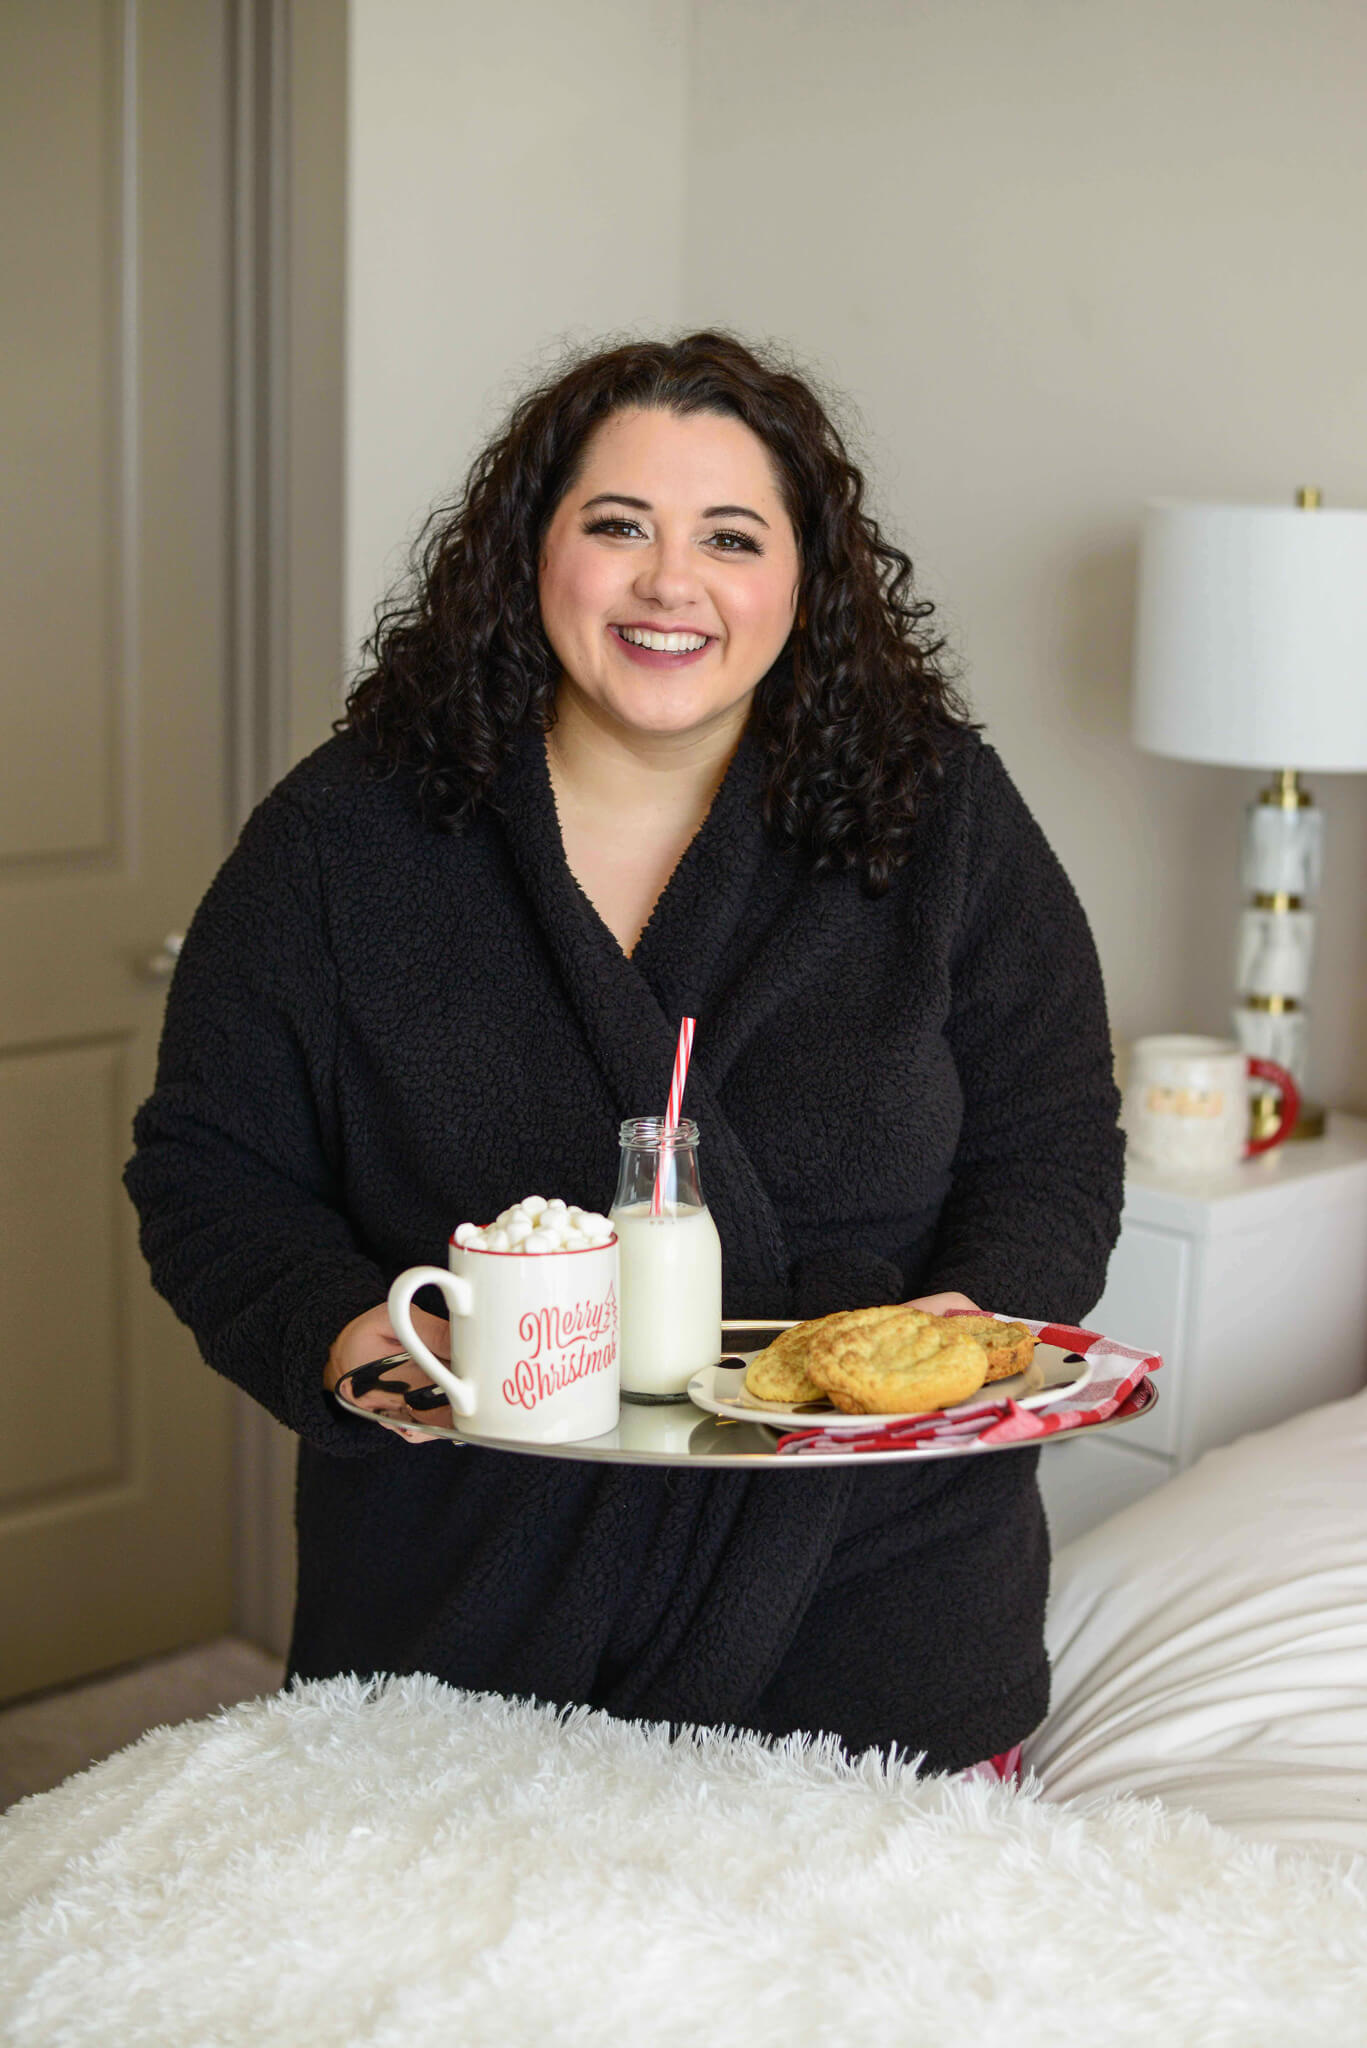 Plus size black sherpa robe is the perfect loungewear for Christmas morning